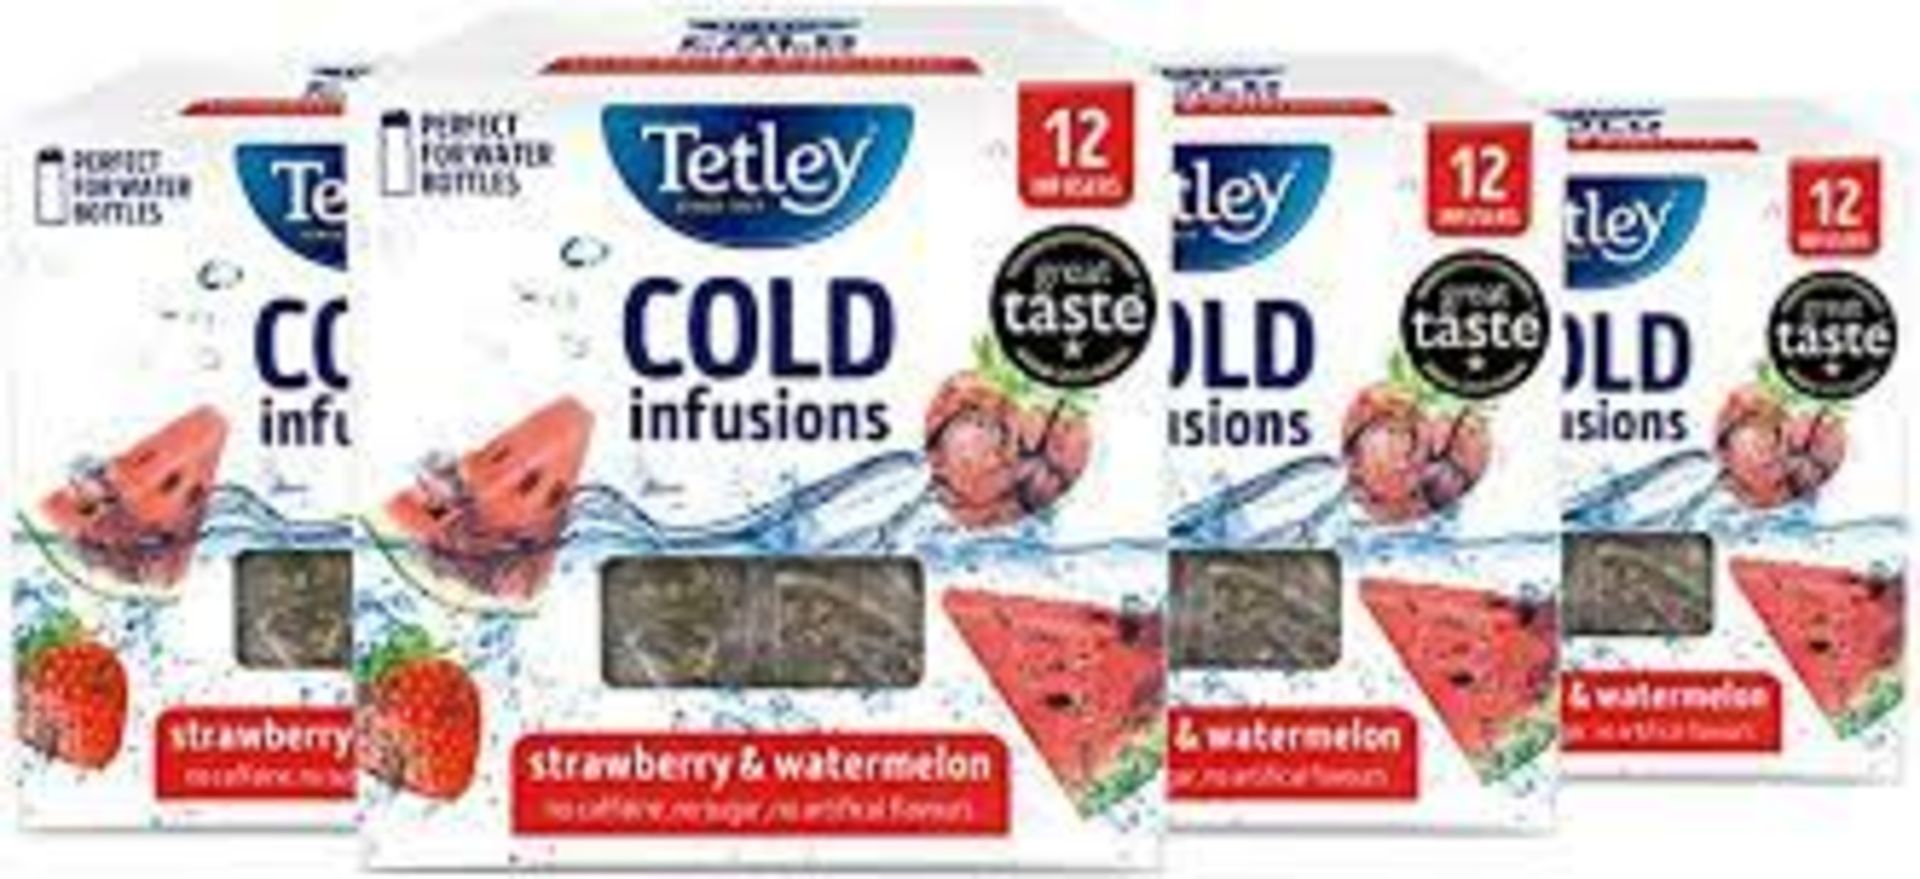 RRP £793 (approx count 87)(C18) spId011UjND 5 x Tetley Cold Infusions Strawberry &